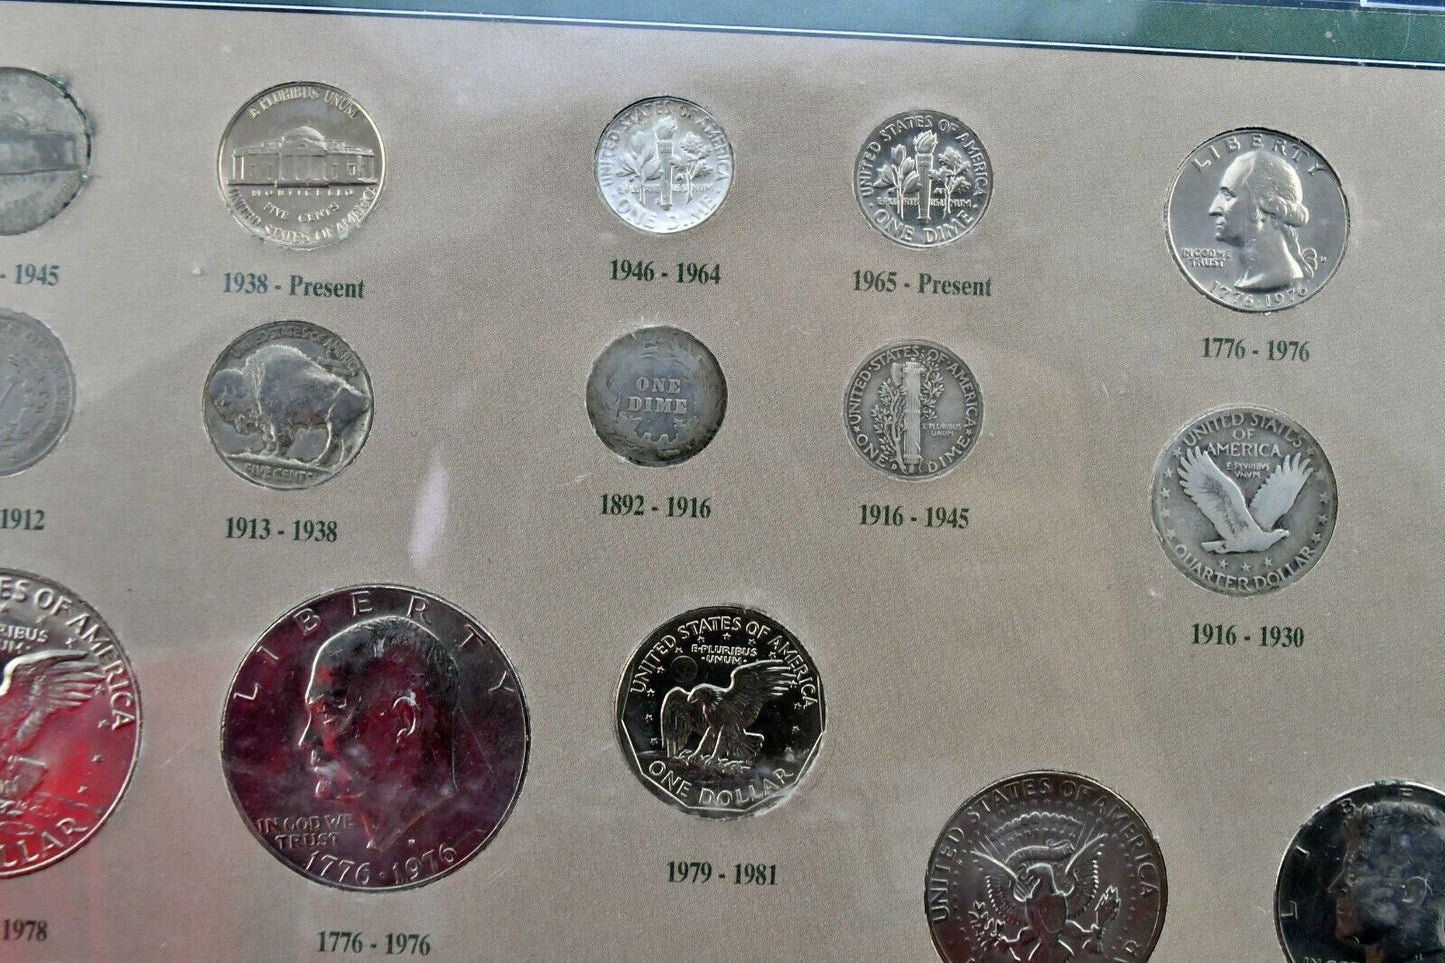 The Treasury of 19th & 20th Century from The Coinage American Historic Society